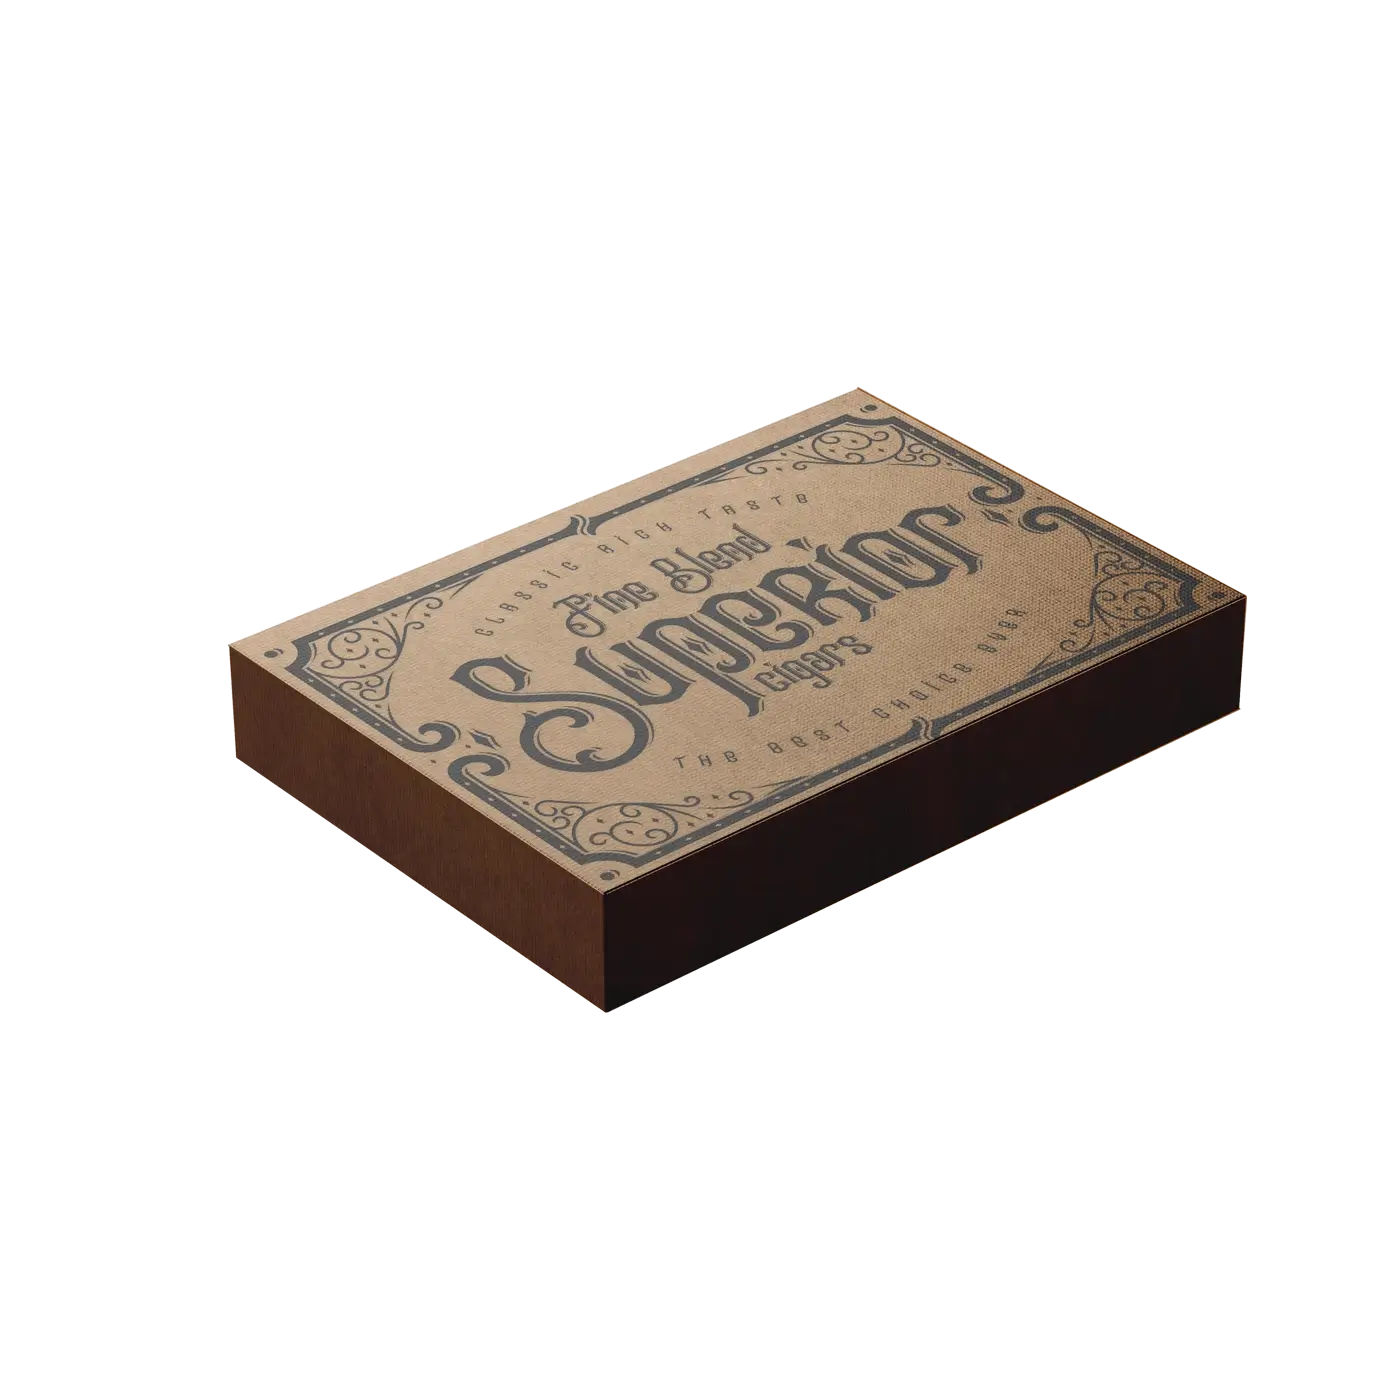 Custom Tobaccos Mailer Box Brown Color Background Black Printed Text Cigar Box Custom Printed Graphics by qualitycustomboxes.com